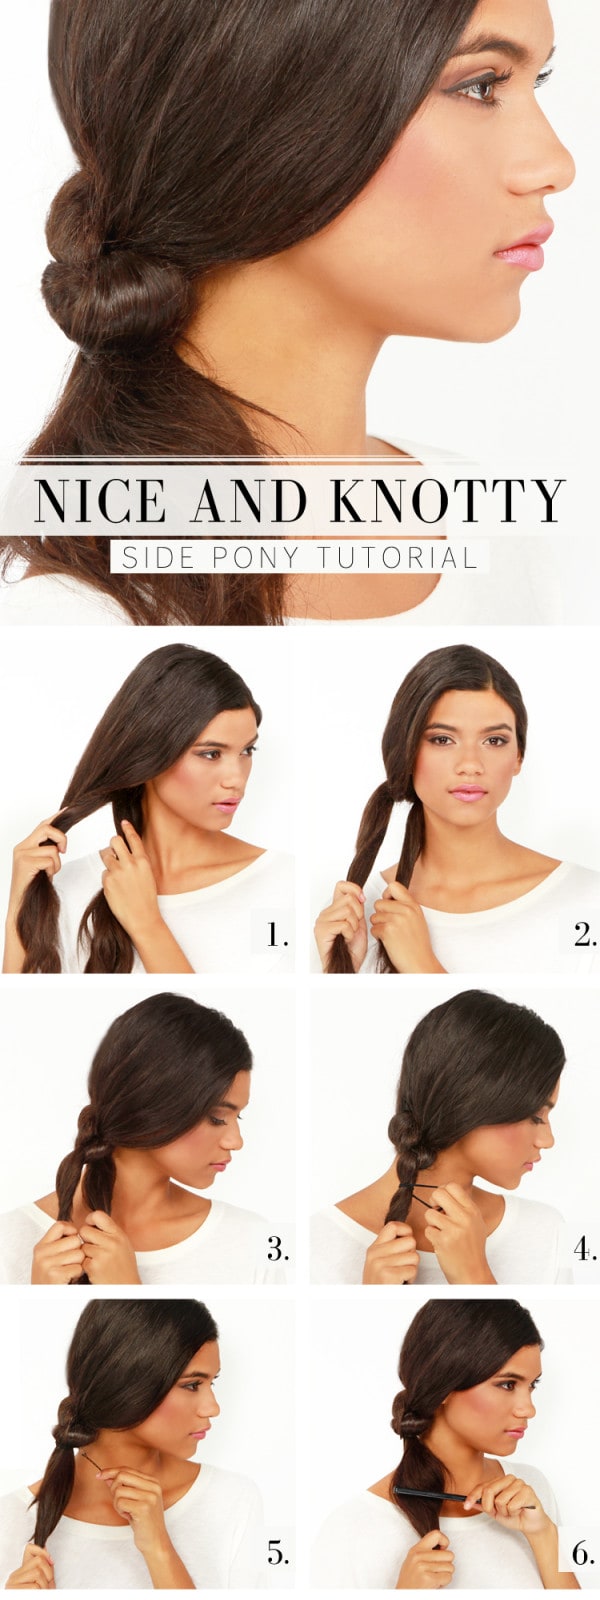 21 Super Easy But Amazing Ponytail Hairstyles That Will Save Your Time In Morning Preparations